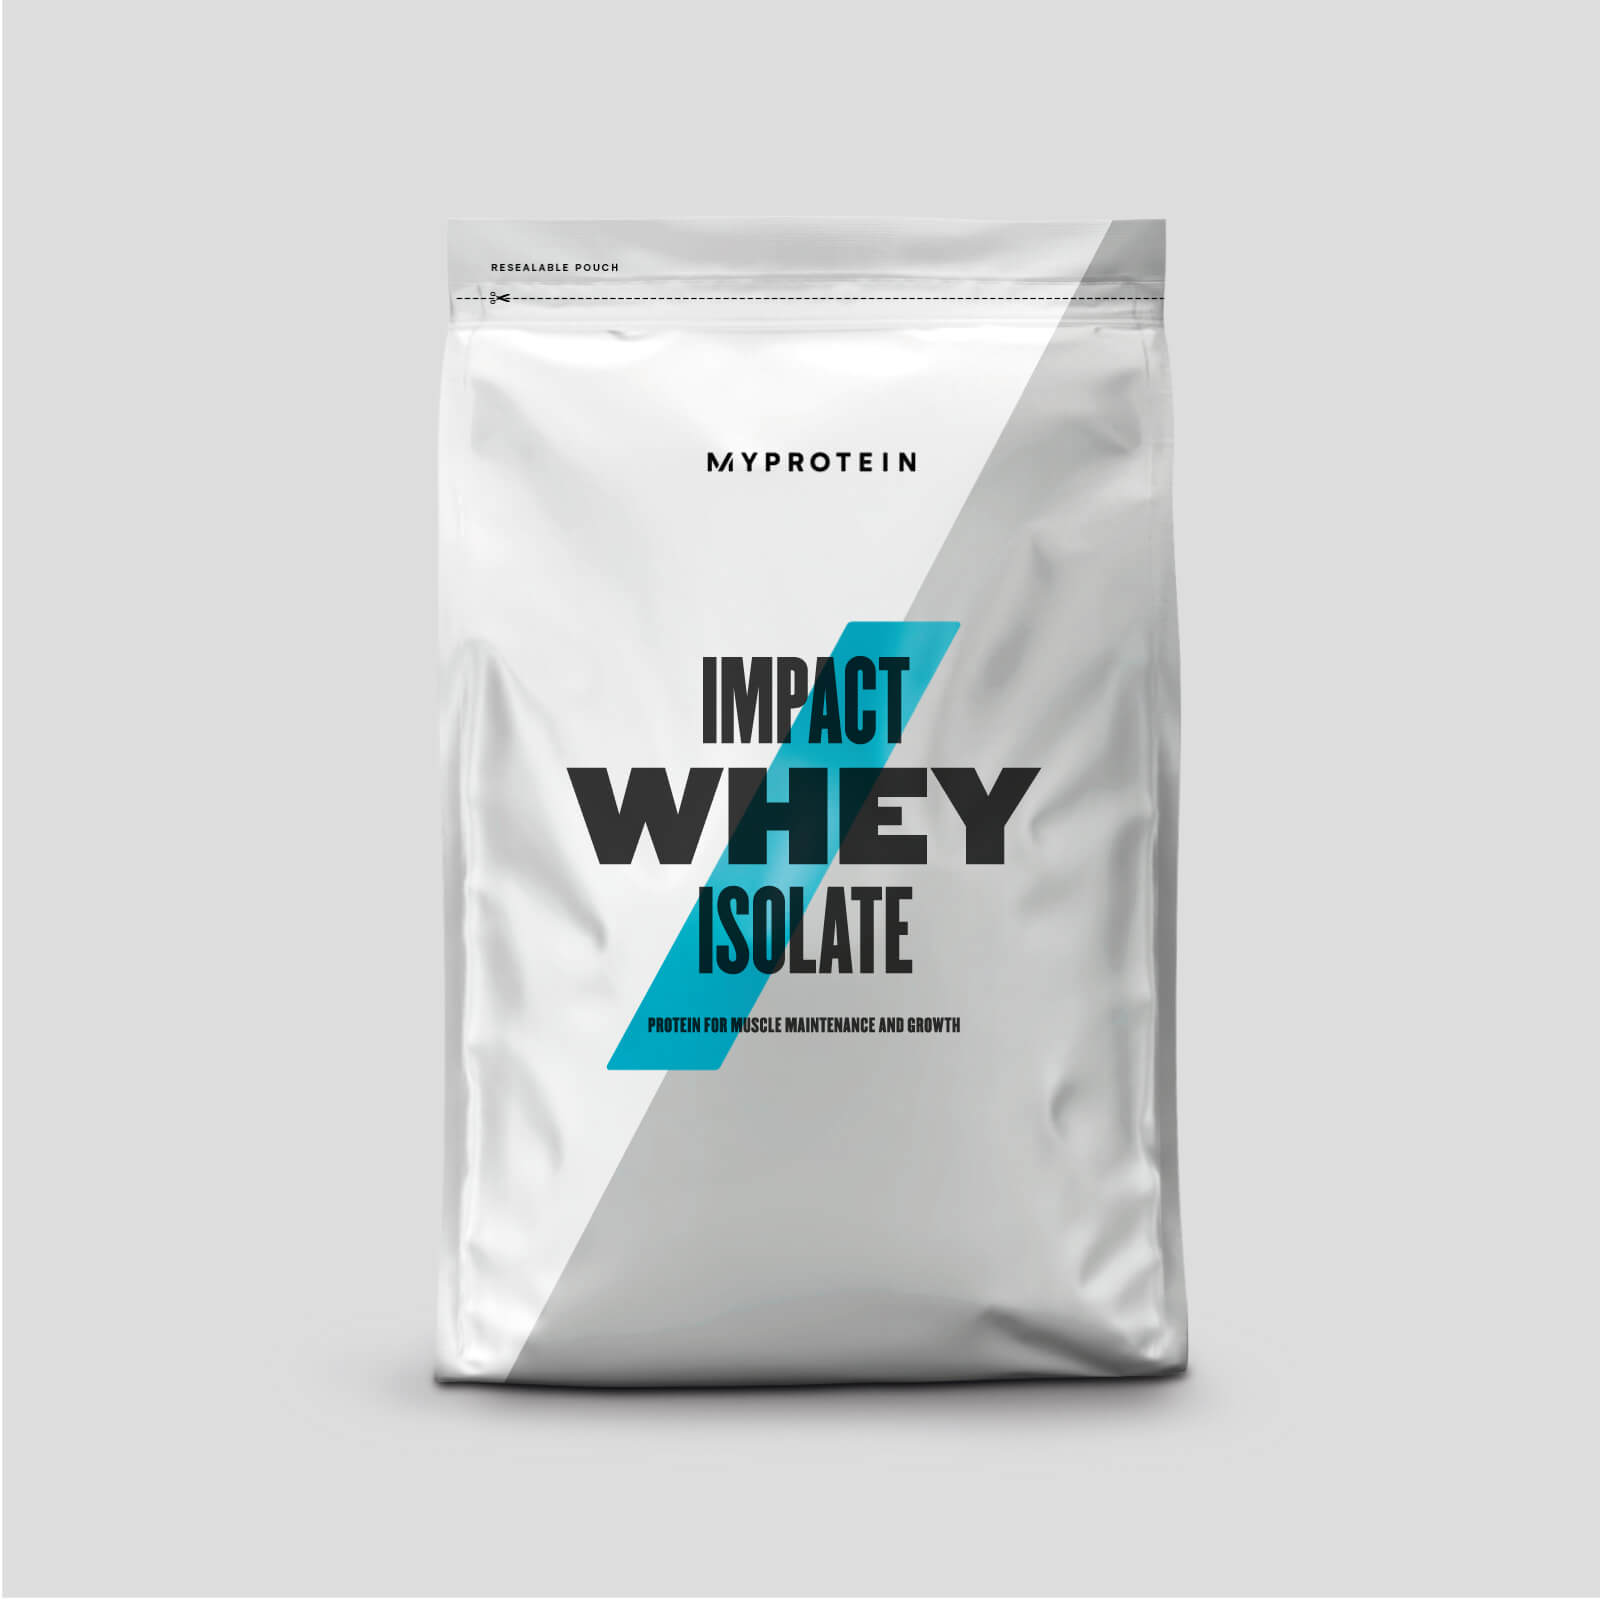 Myprotein Impact Whey Isolate - 2.5kg - Chocolate Mint